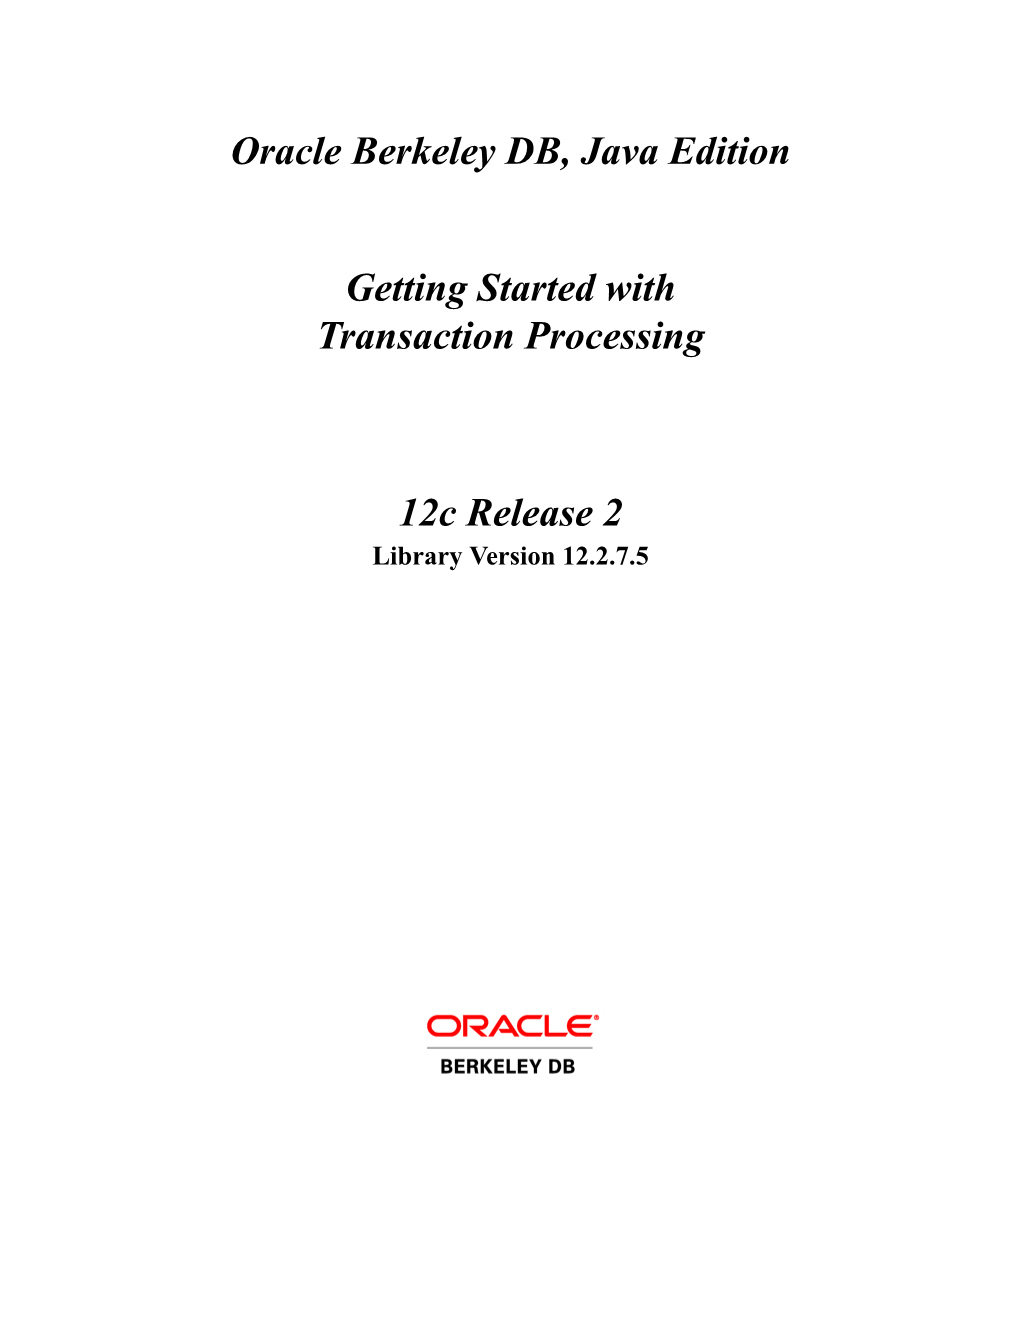 Berkeley DB, Java Edition Getting Started with Transaction Processing